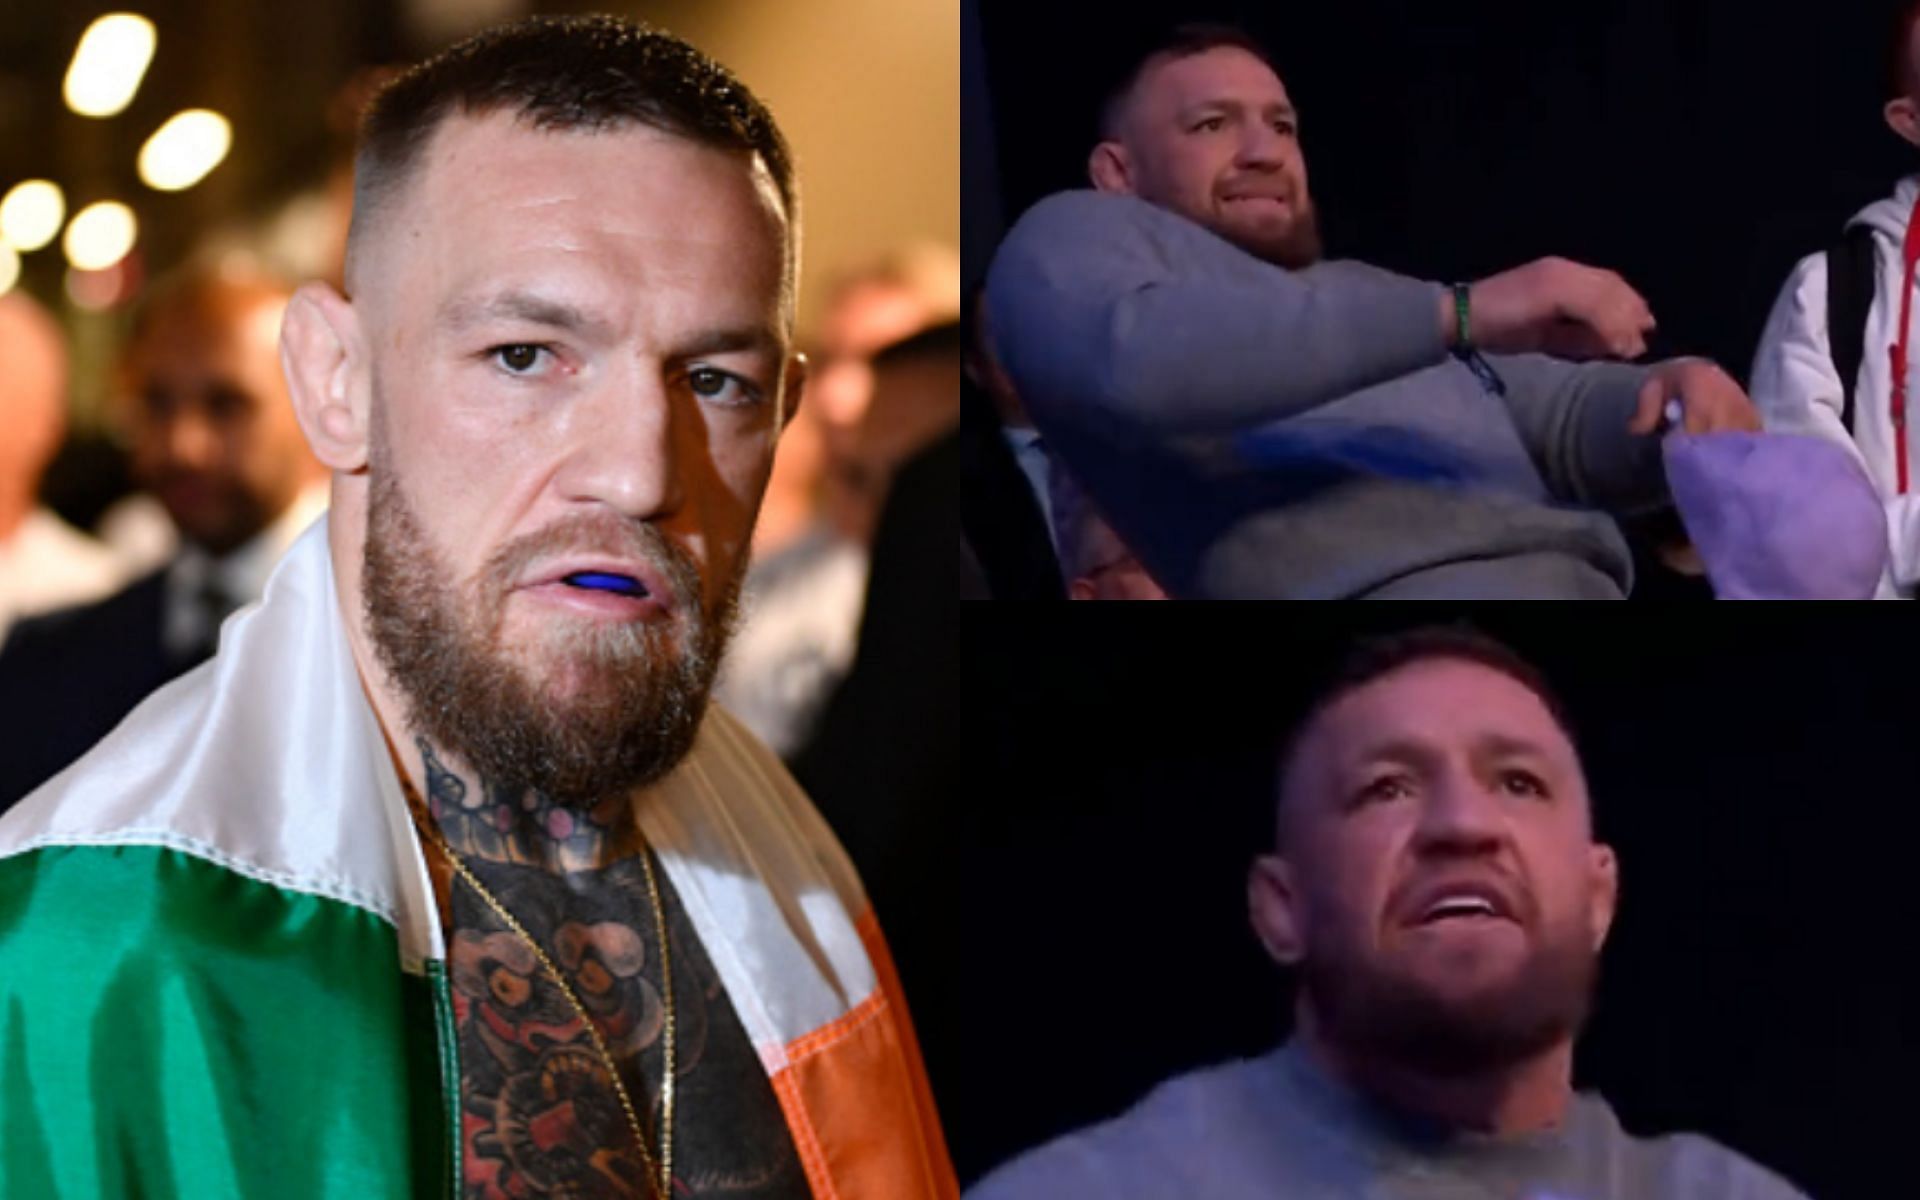 Conor McGregor (left, image courtesy of Getty); McGregor at Bellator 275 (top and bottom right, images courtesy of @BellatorMMA Twitter)